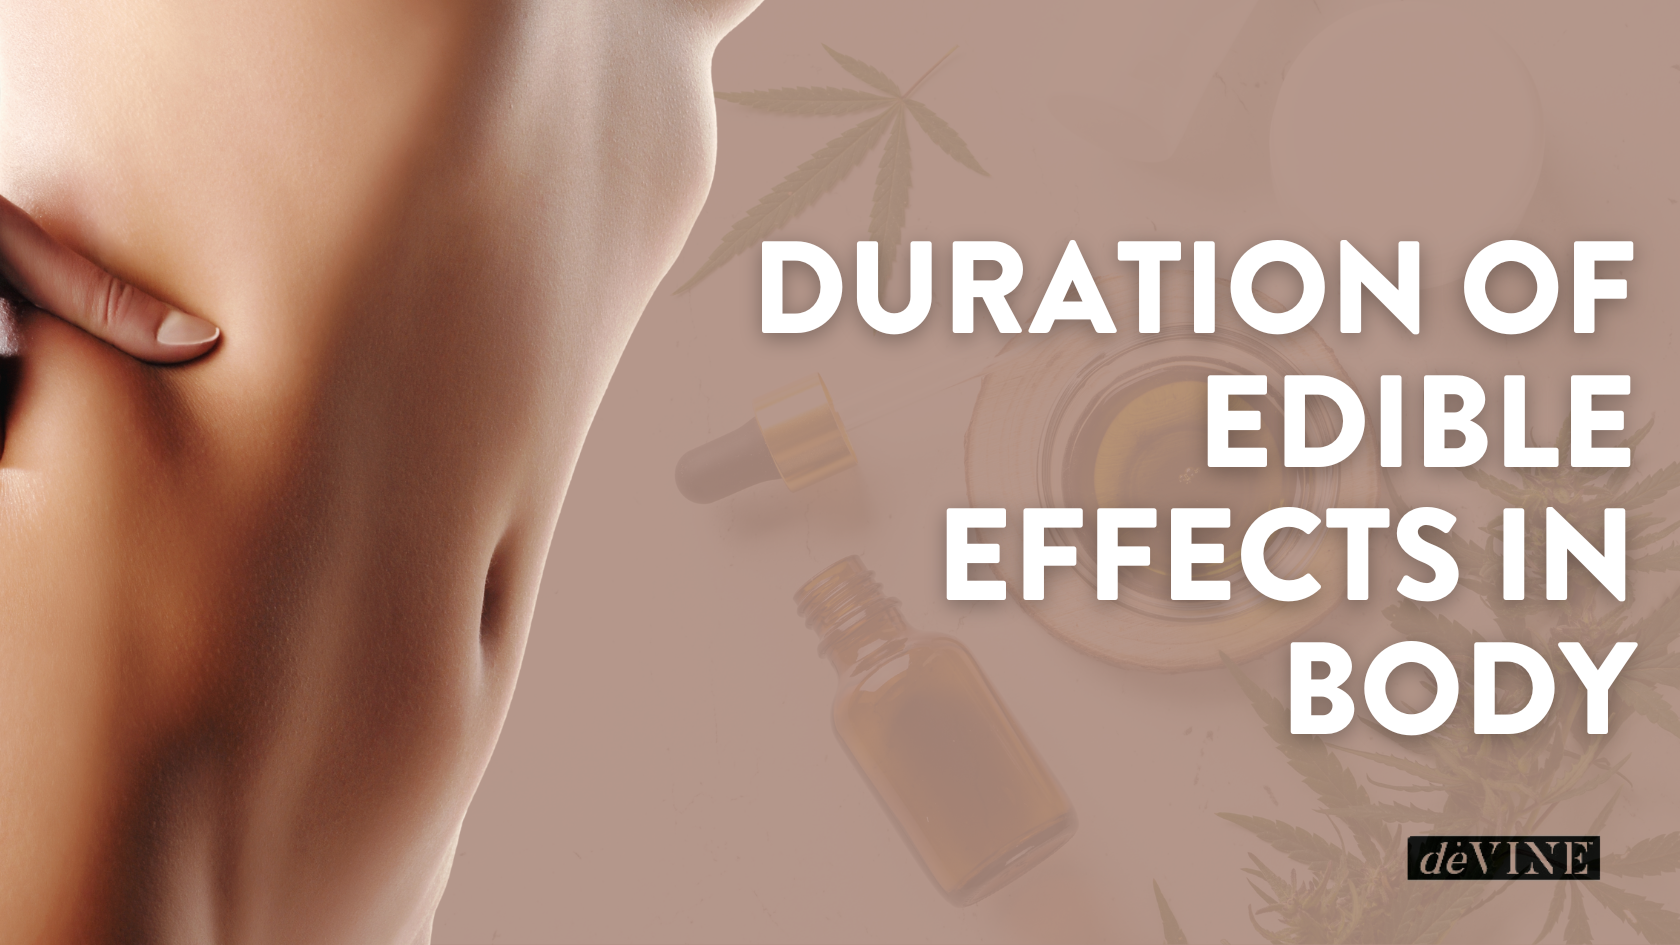 Duration of edible effects in body